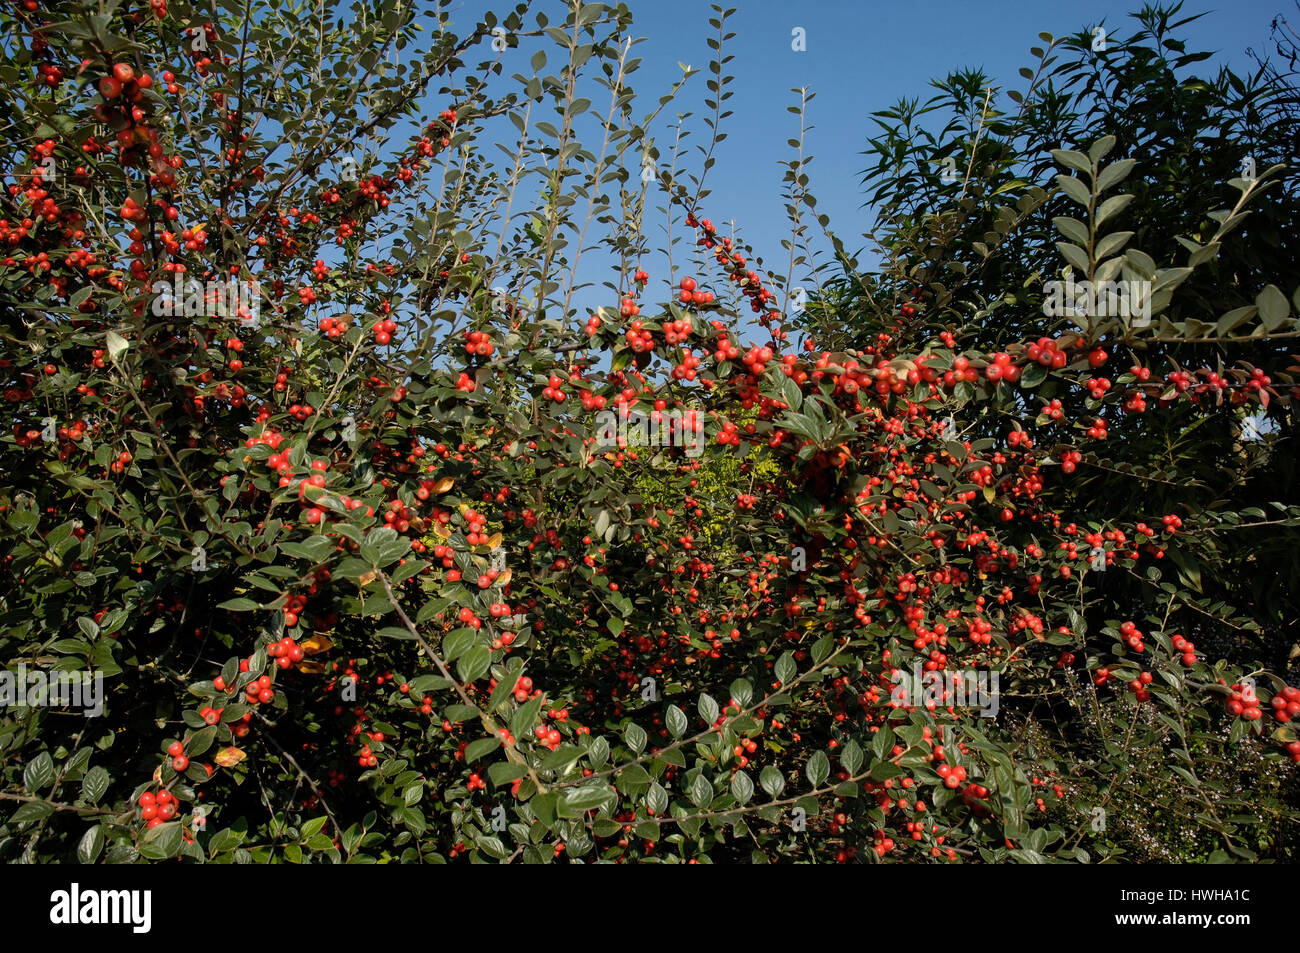 Franchet see cotoneaster, berries, Cotoneaster franchetii Franchets midget medlar, berries, Franchet s cotoneaster, berries / (Cotoneaster franchetii  Stock Photo